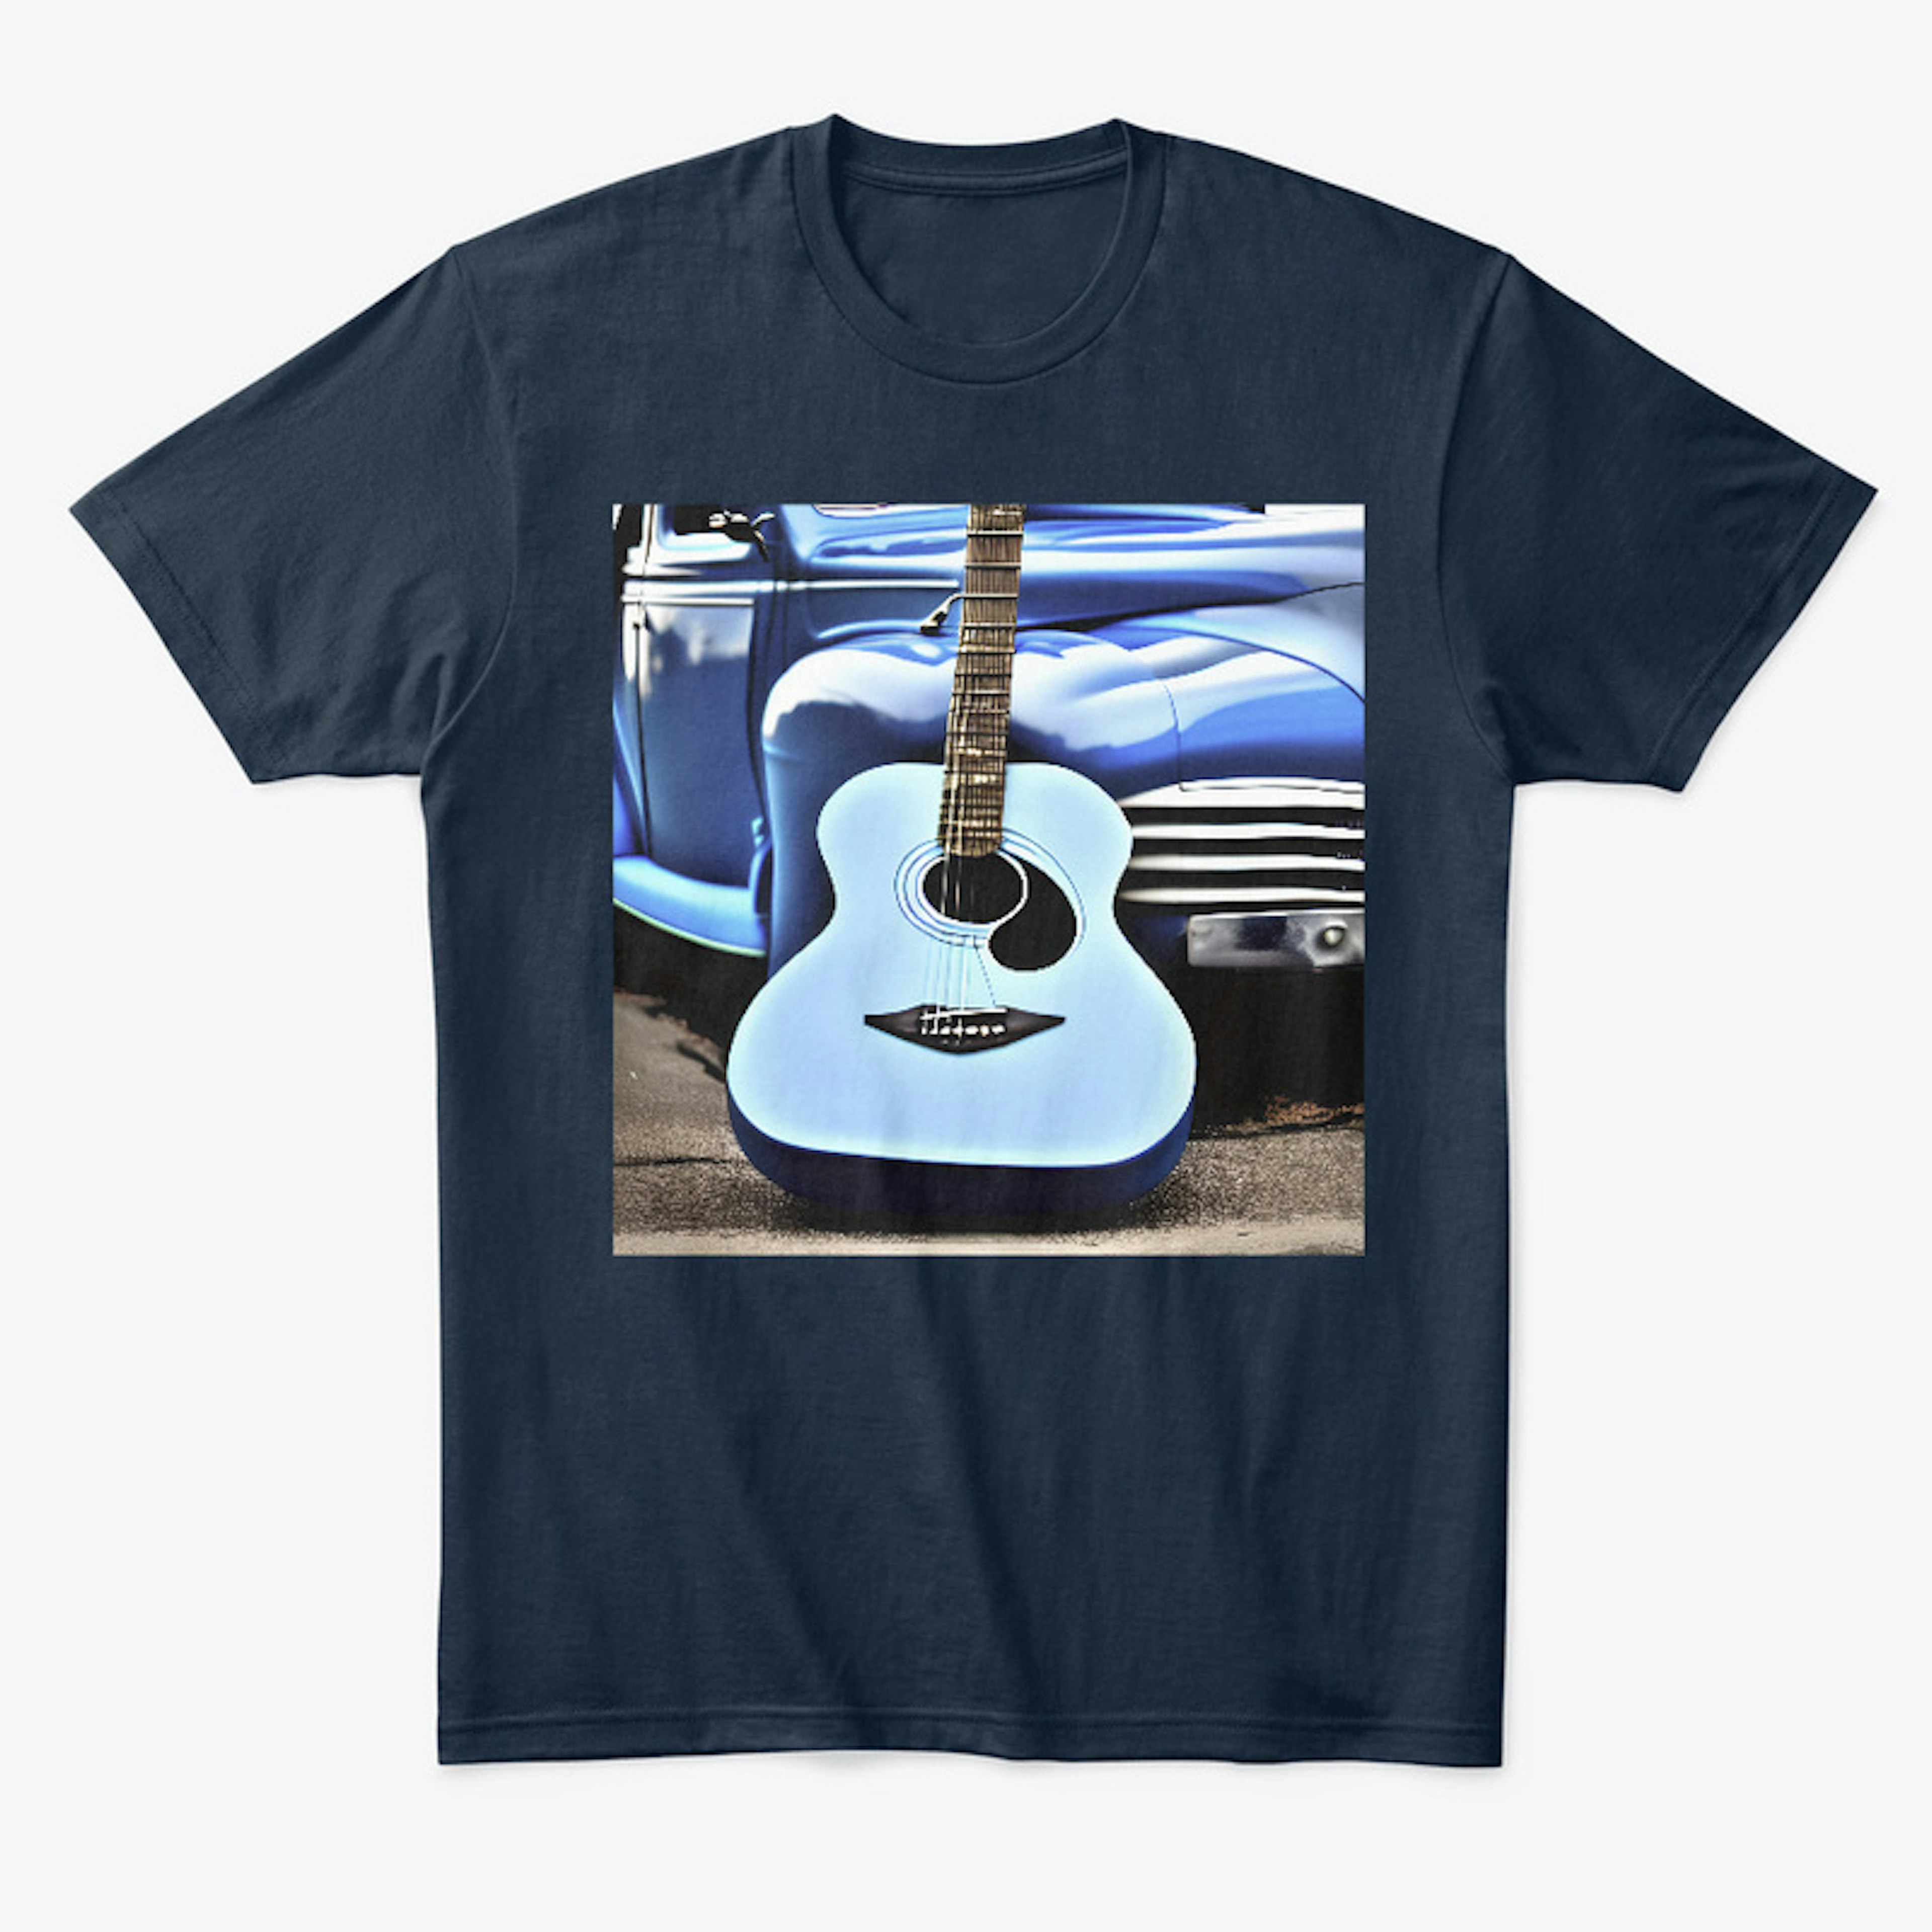 The Guitars and Cars Collection